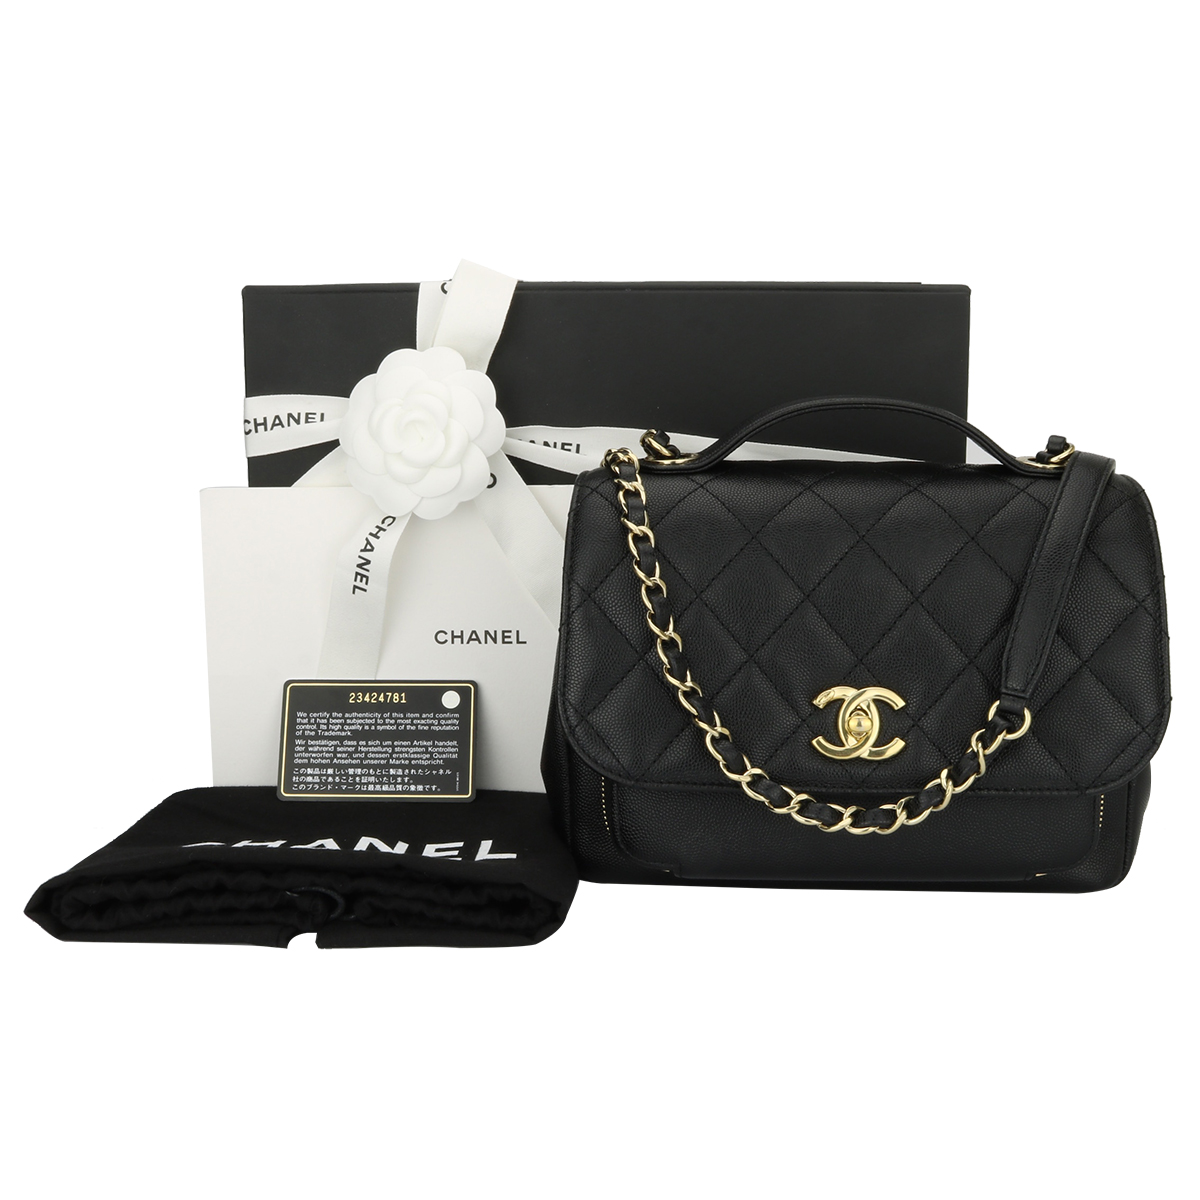 Naughtipidgins Nest - New Chanel Medium Business Affinity Bag in Black  Caviar with Champagne Gold Hardware. Brand New. Unashamedly practical as  well as ultimately beautiful, its sophisticatedly elegant & feminine design  is